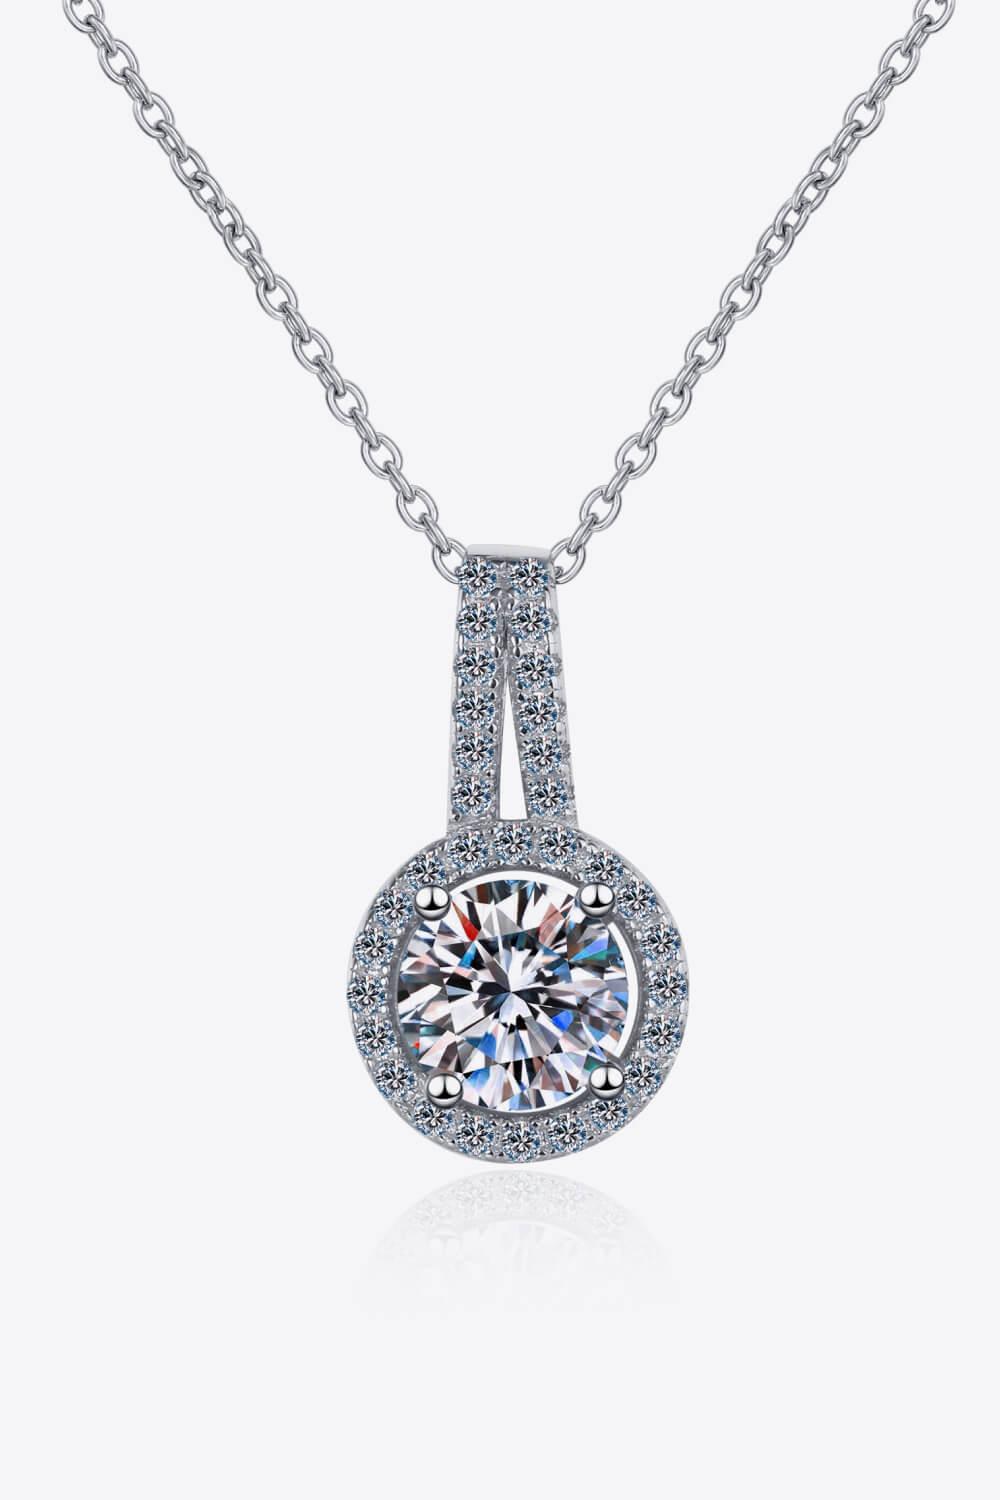 Build You Up Moissanite Round Pendant Chain Necklace - Trendha